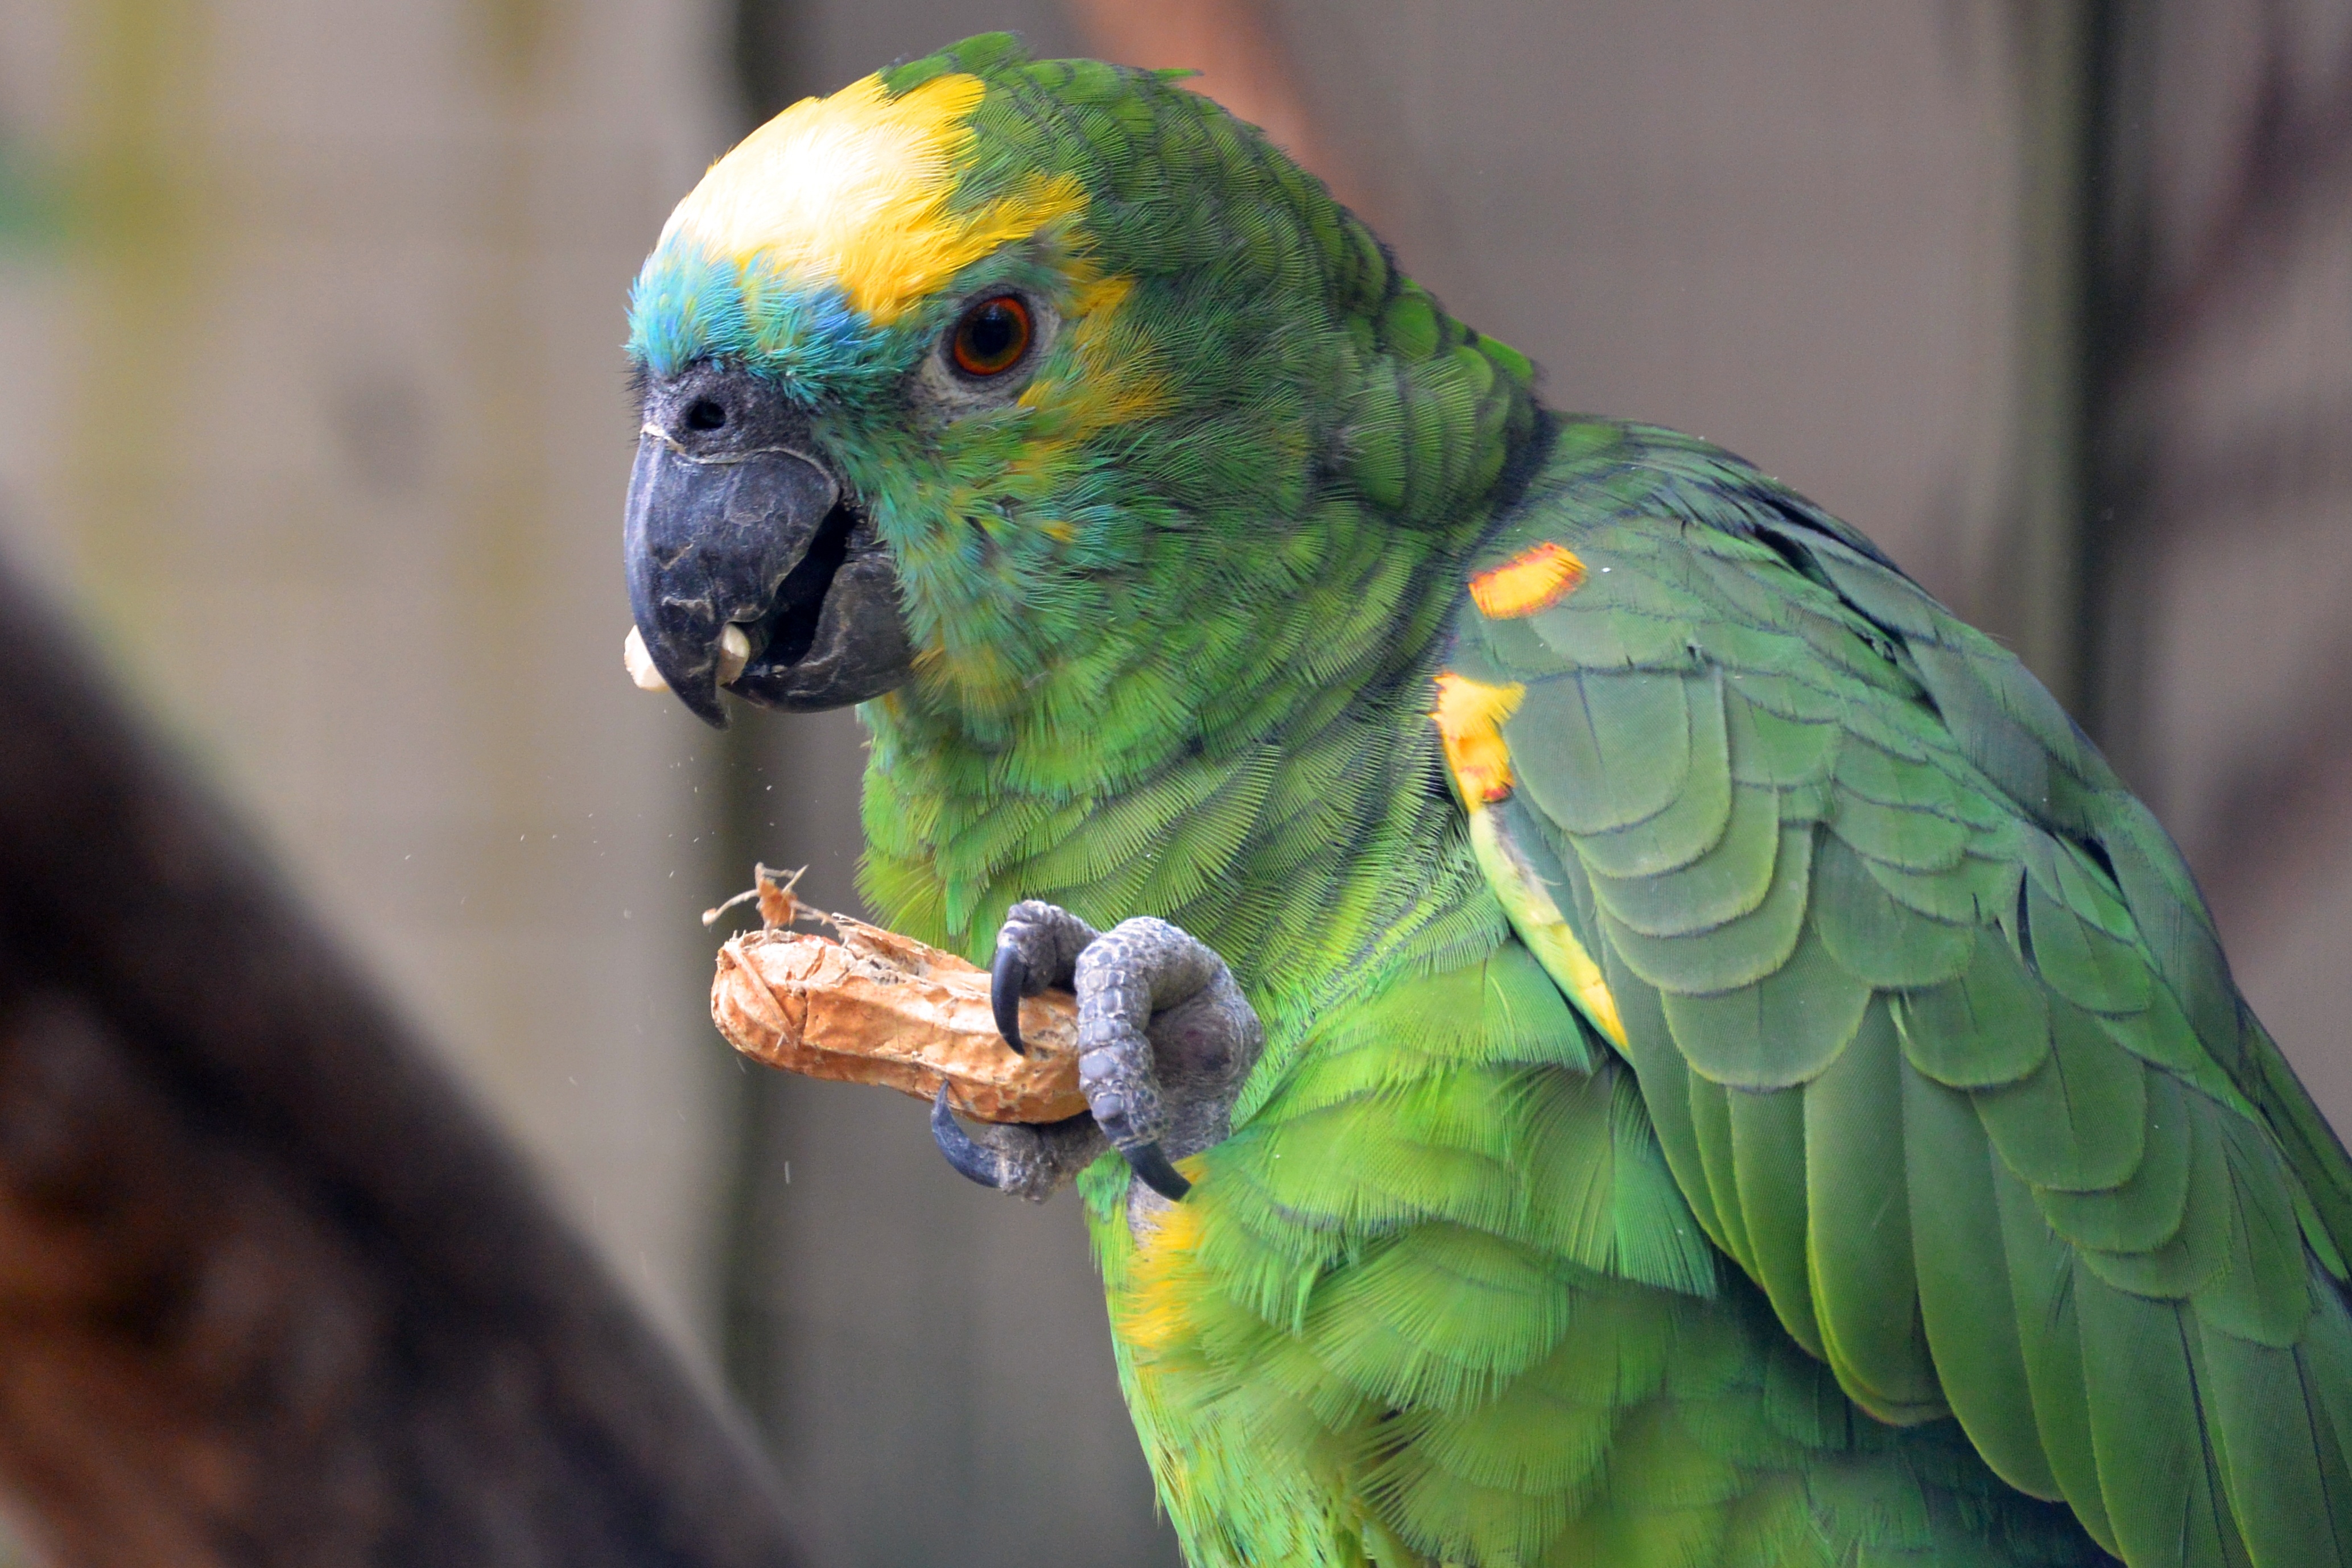 A green parrot in the wild eats a peanut